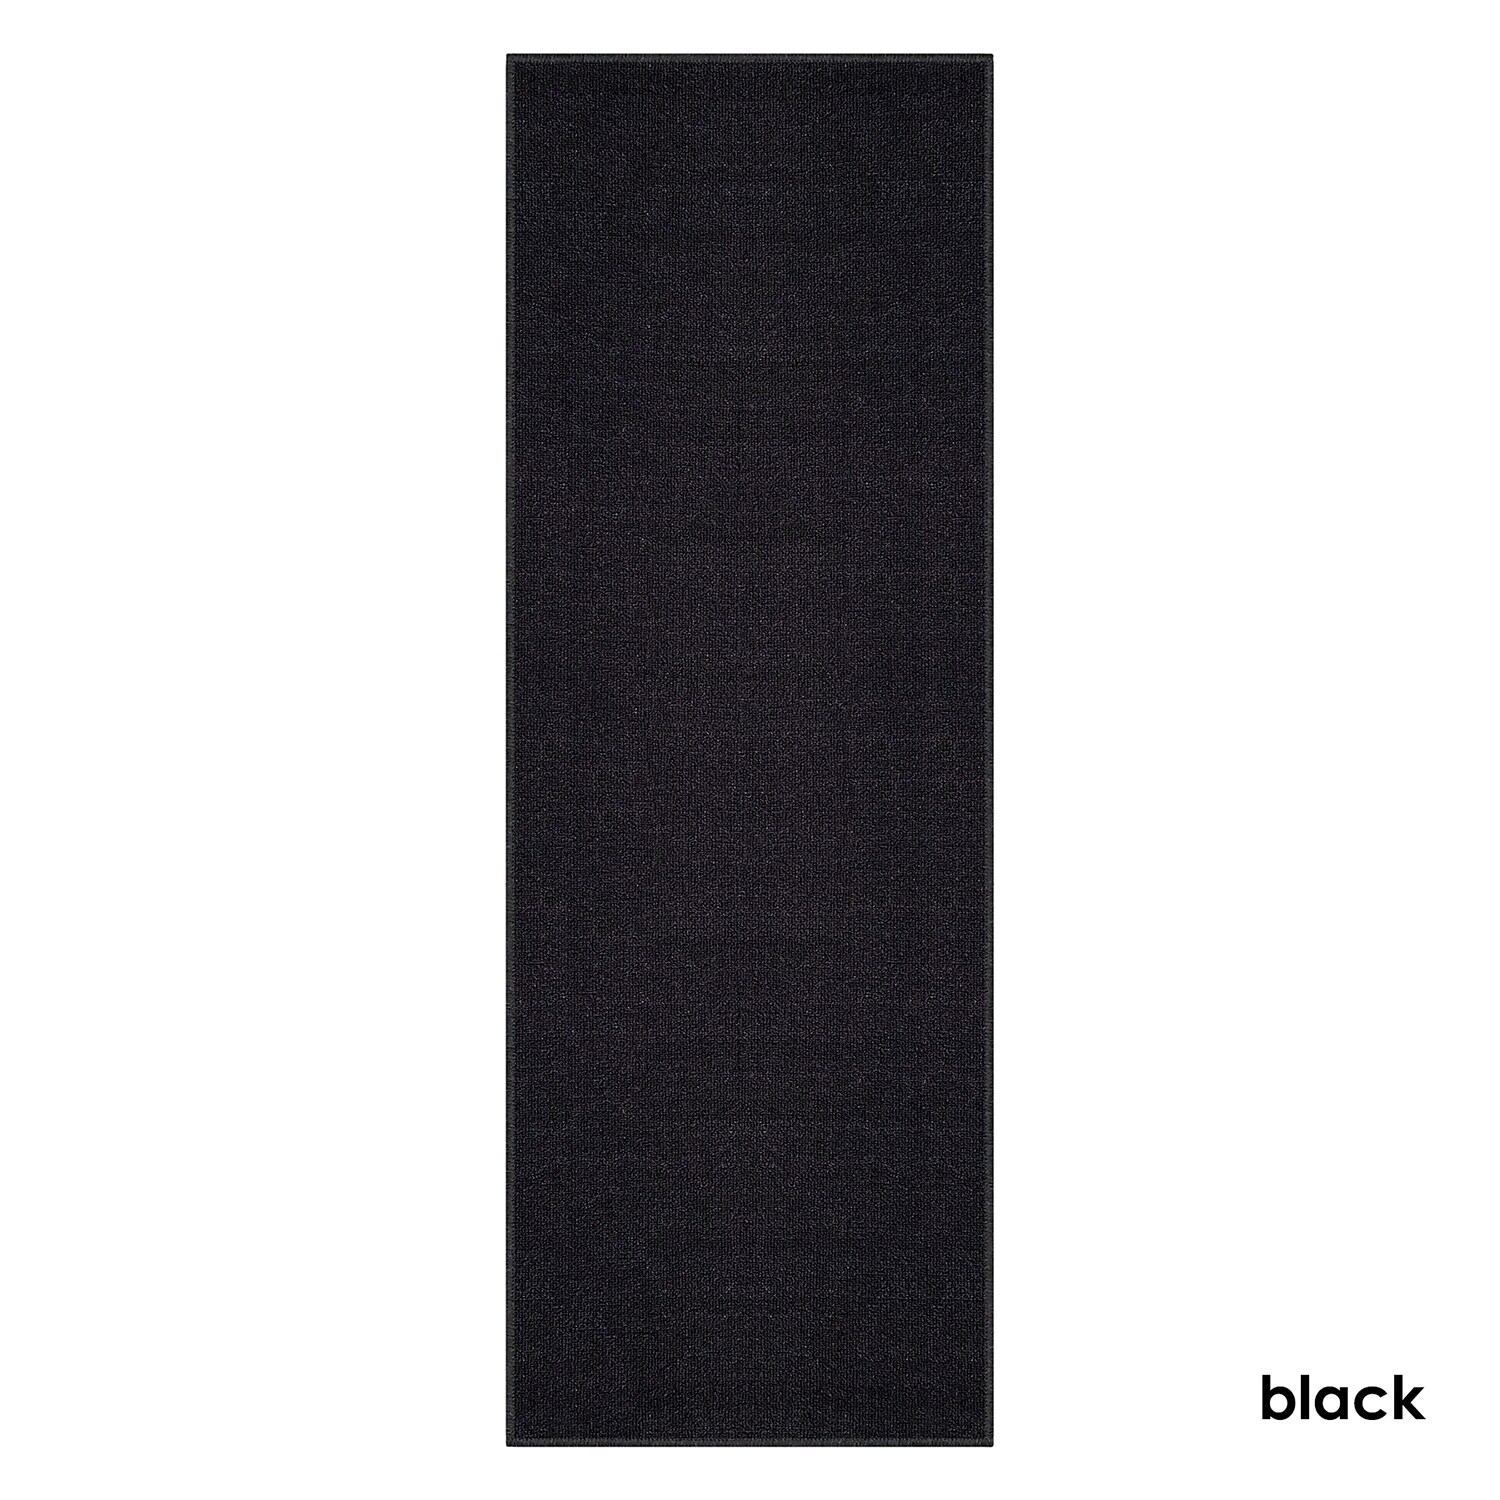 Kapaqua Solid Colored Non-Slip Runner Rug Rubber Backed 2x14 - 1